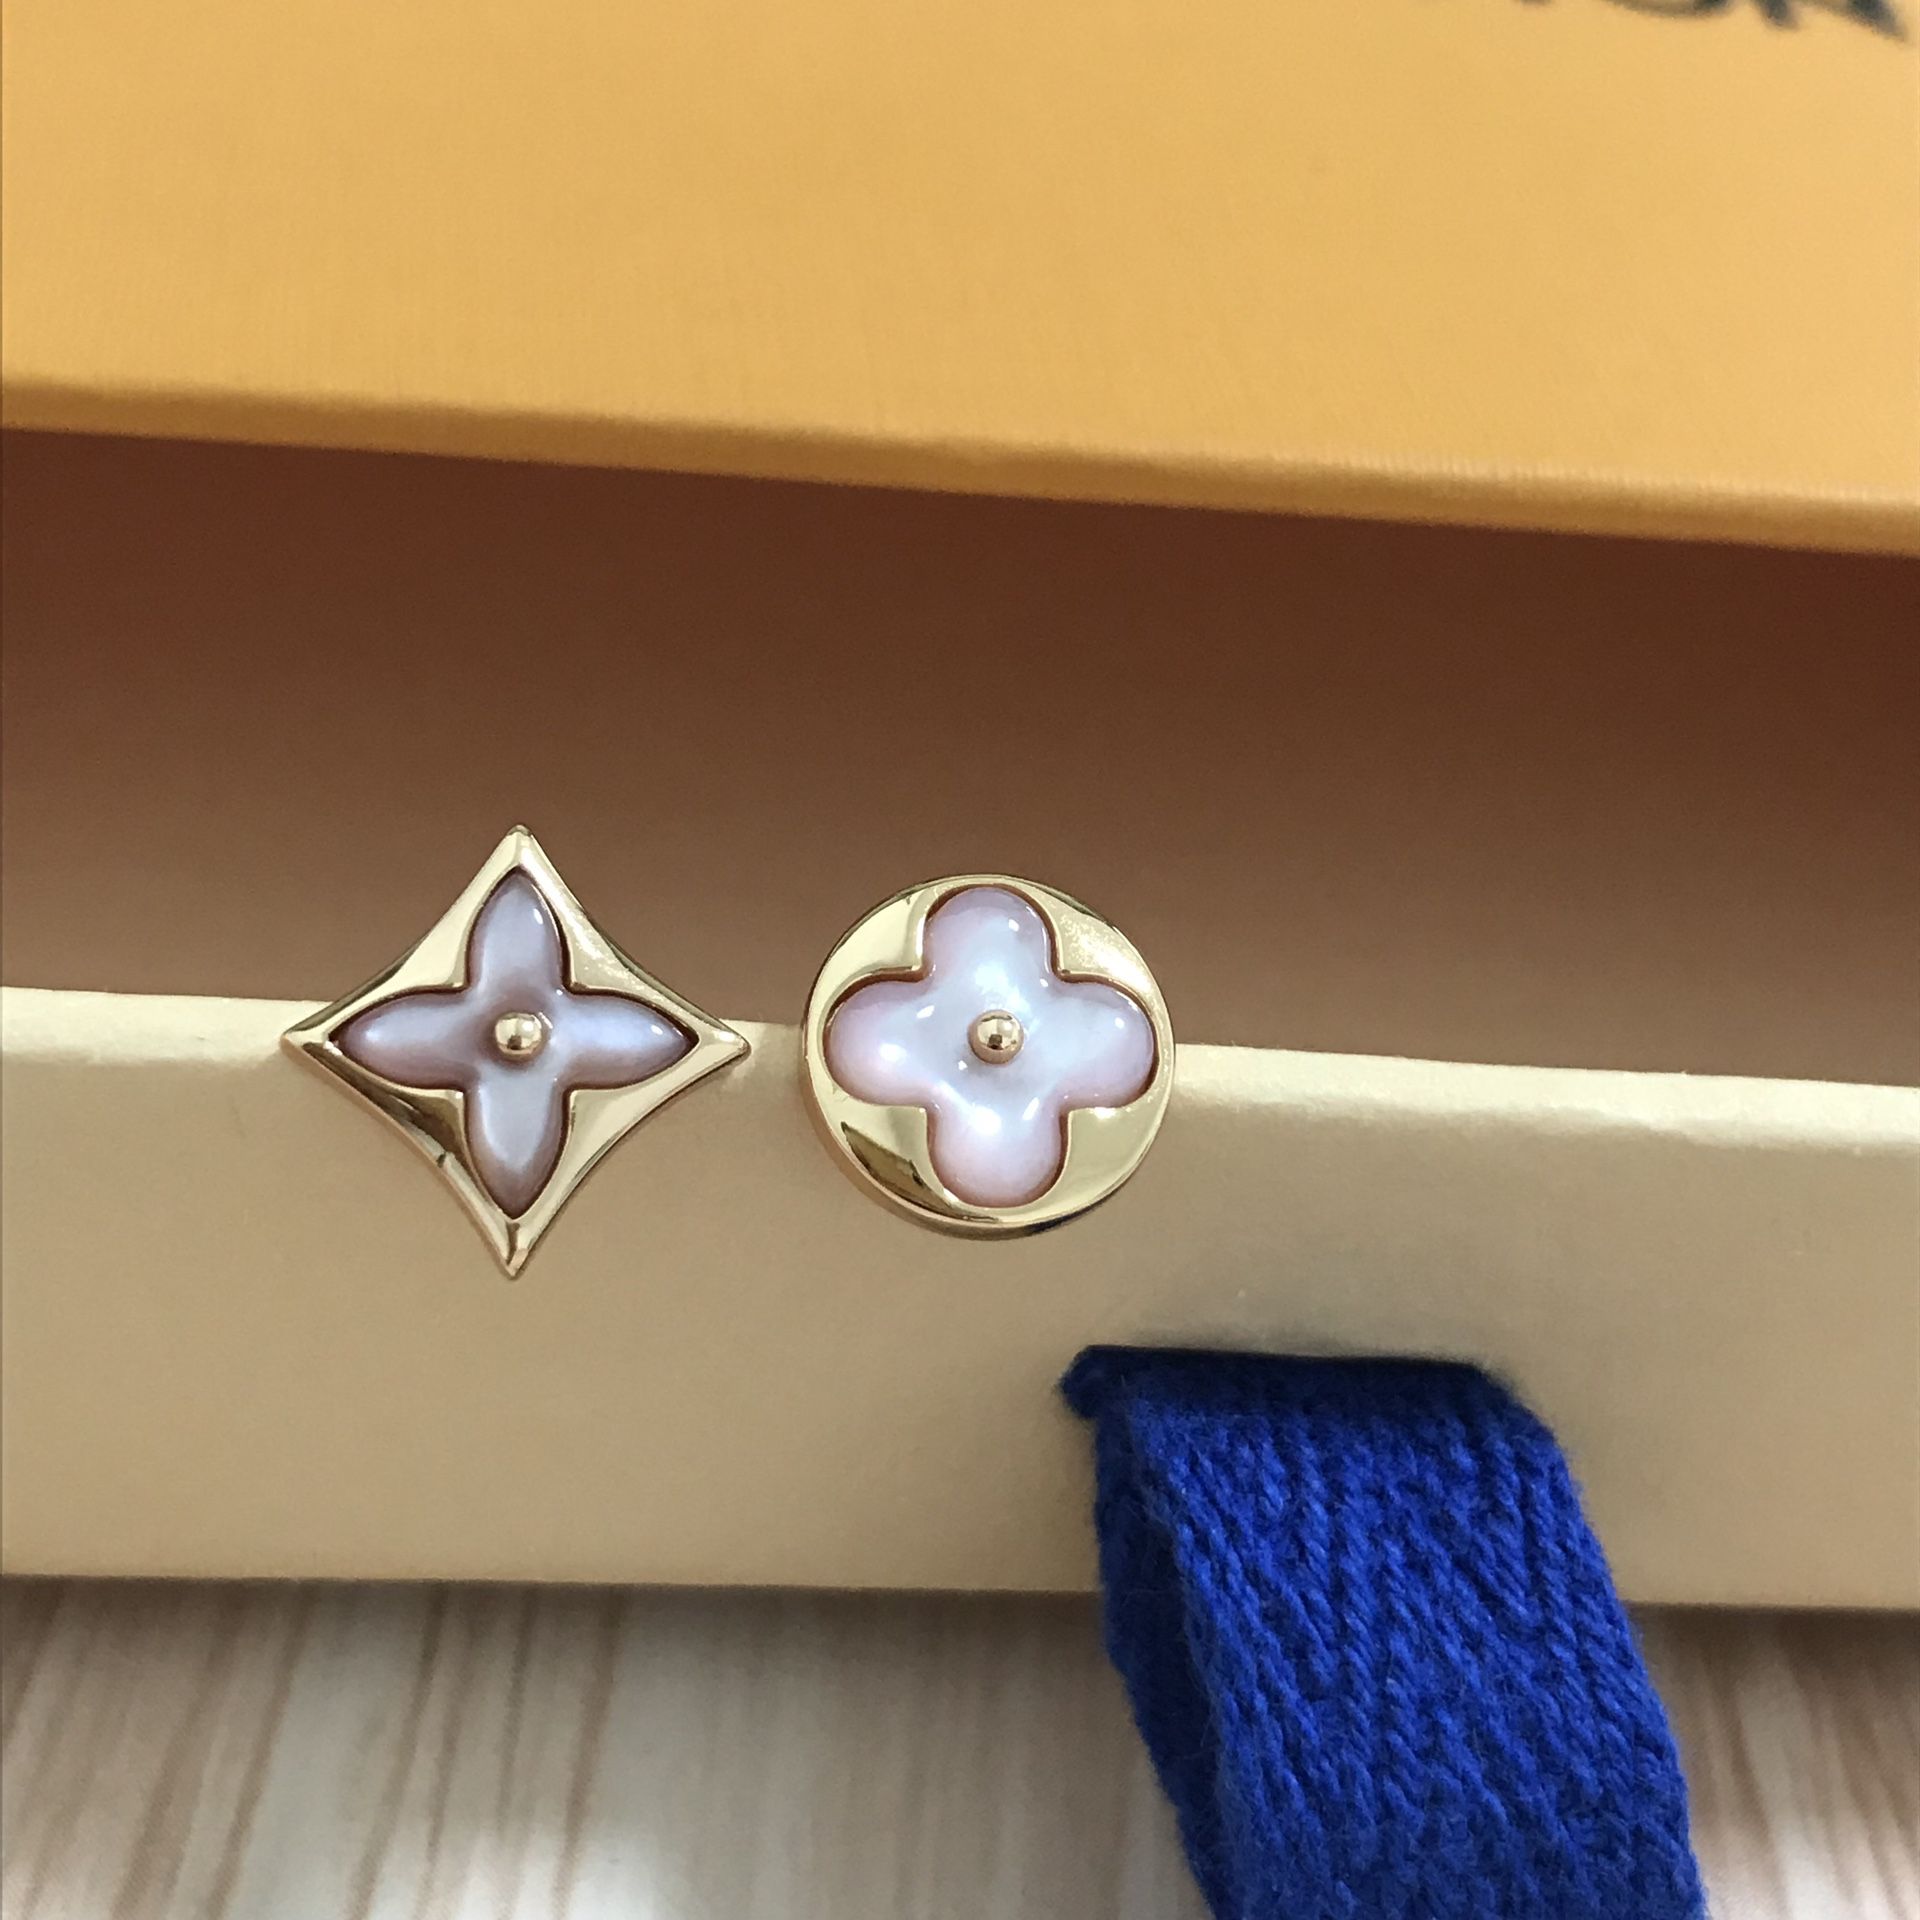 Louis Vuitton Rose Gold Irregular Pink Stud Earrings for Sale in Los  Angeles, CA - OfferUp